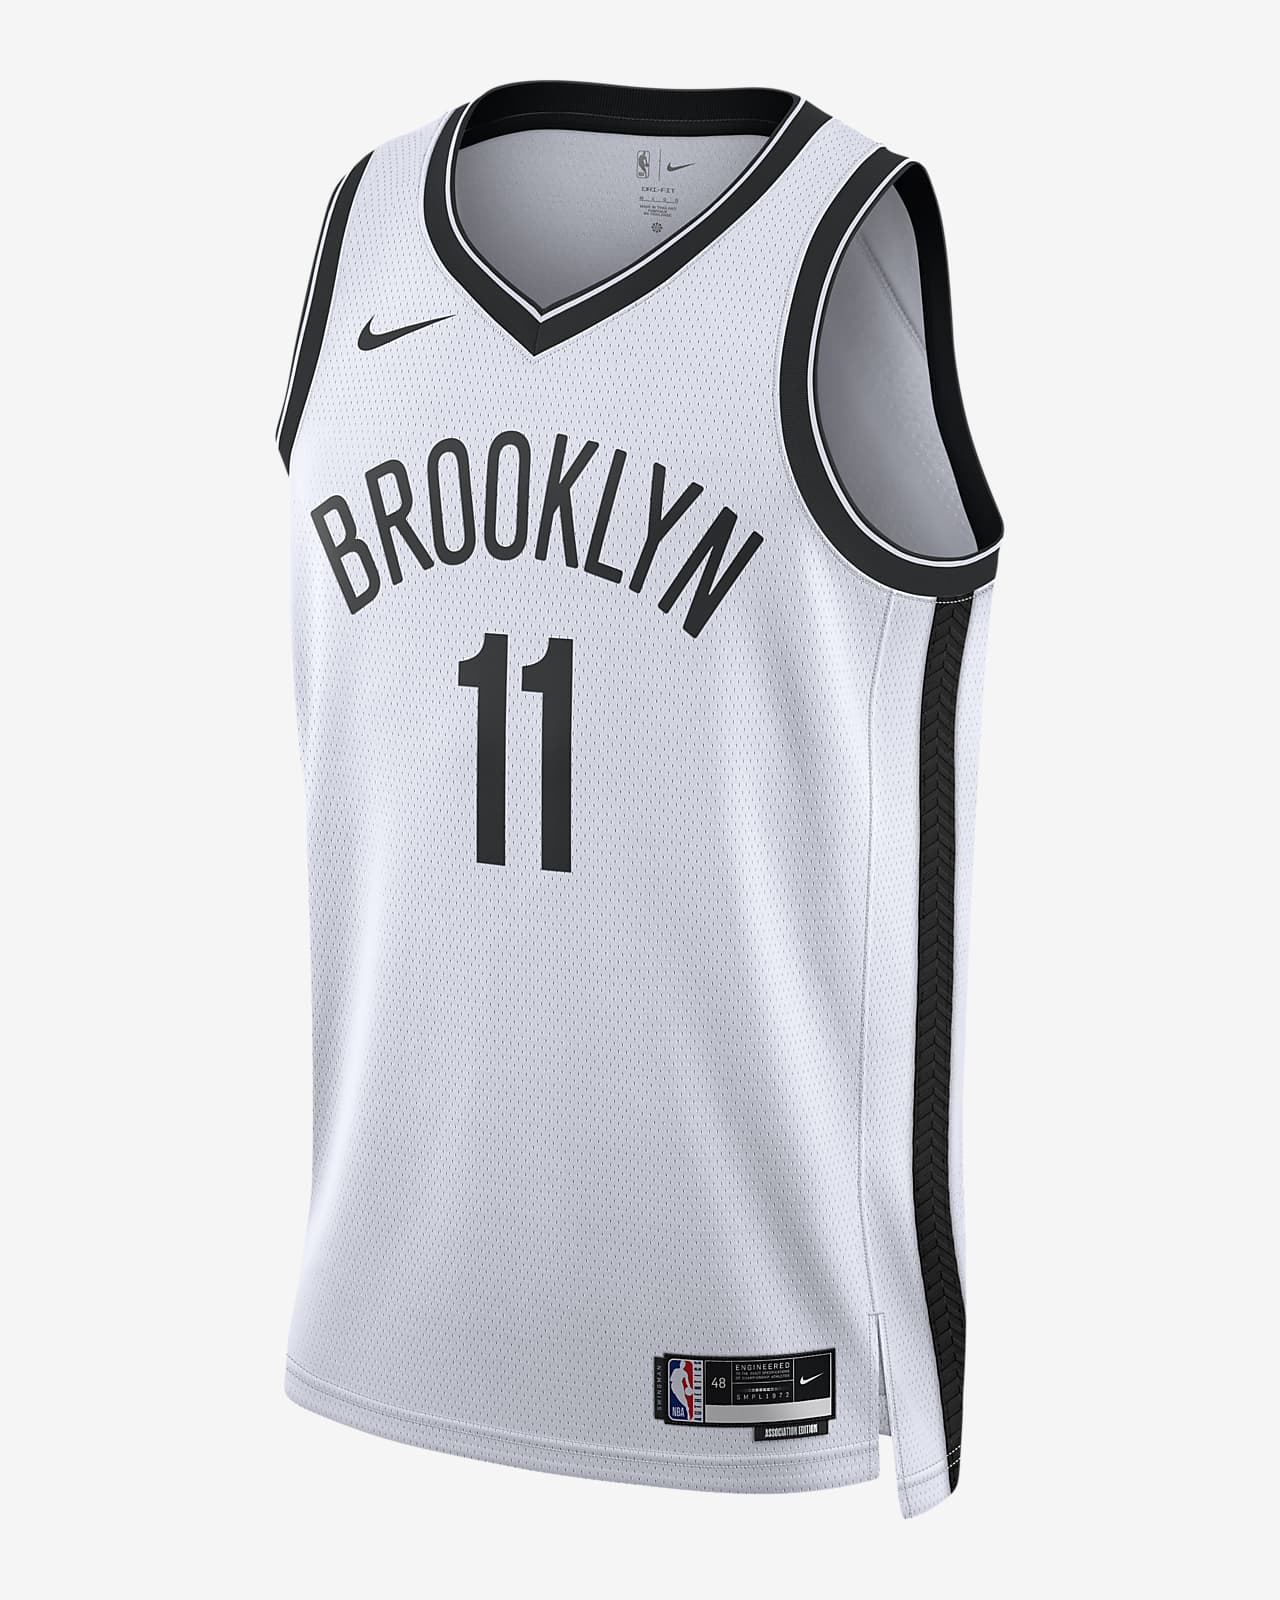 grey and white nba jersey